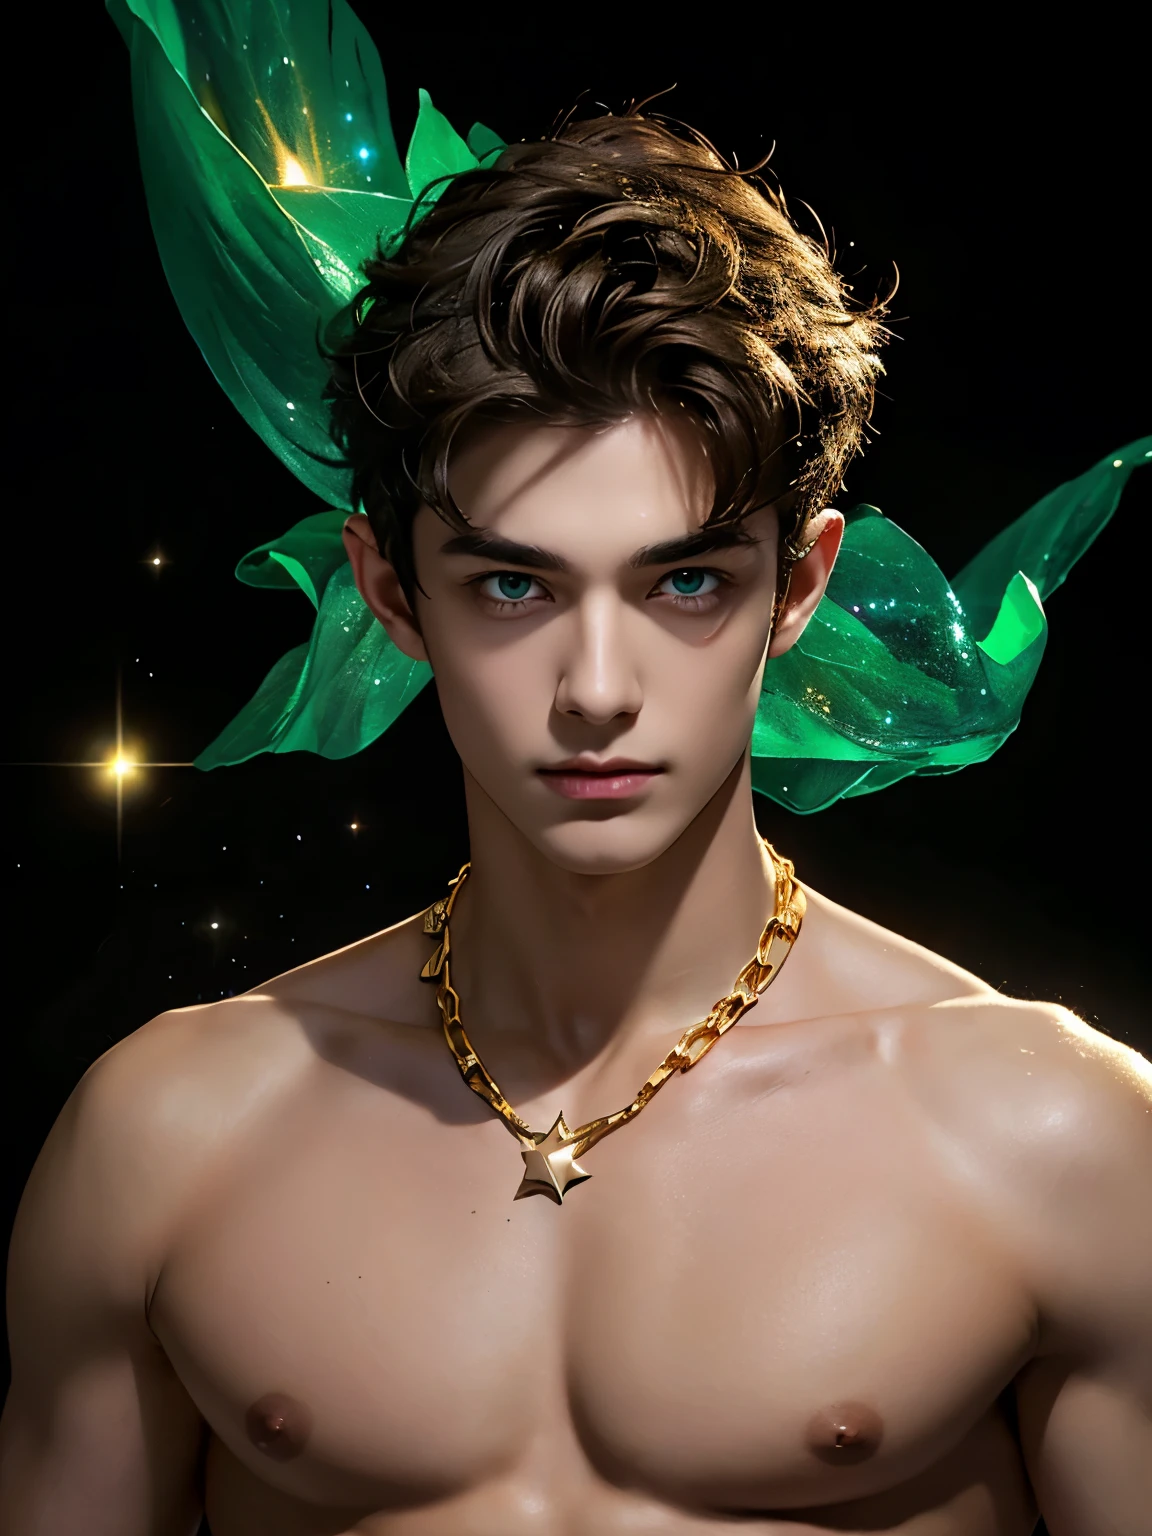 Attractive guy , the boy has very short brown hair, Emerald eyes, on a black background - galaxy , stars . The Magic Look ! naked torso, large puffy nipples, gold chain with emerald around the neck.  top quality portrait photo !